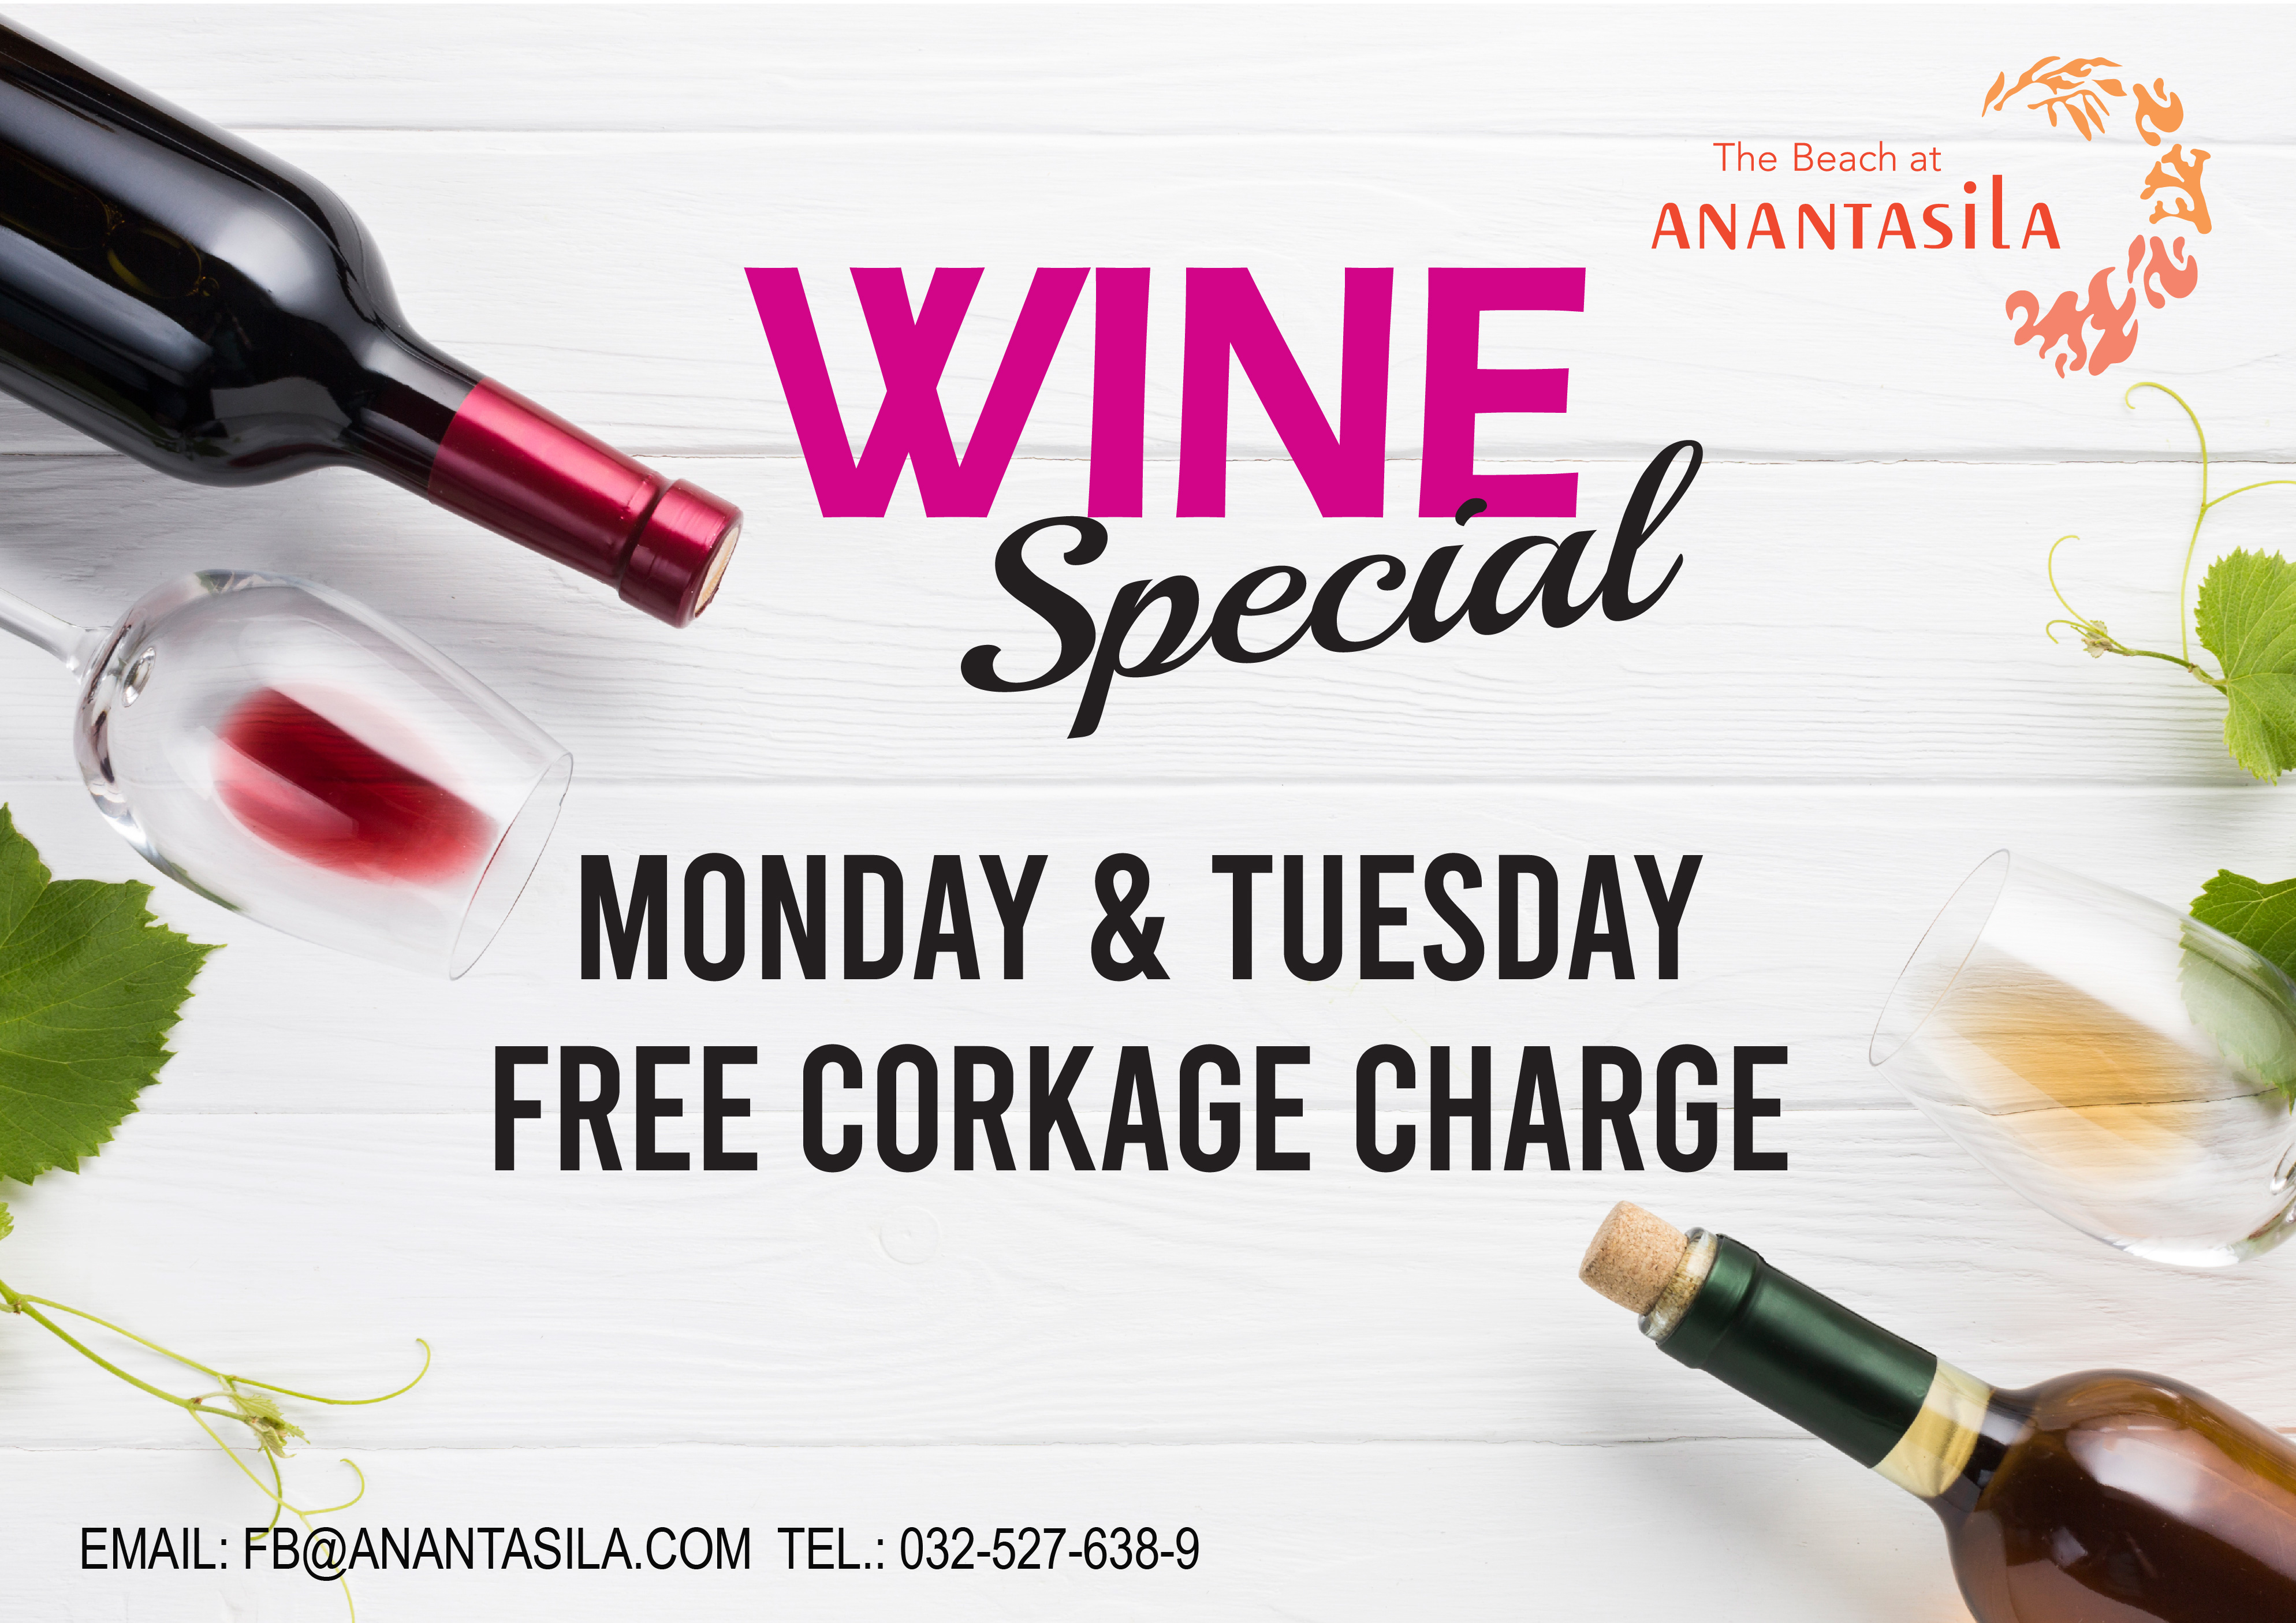 Promotion of Free Wine corkage